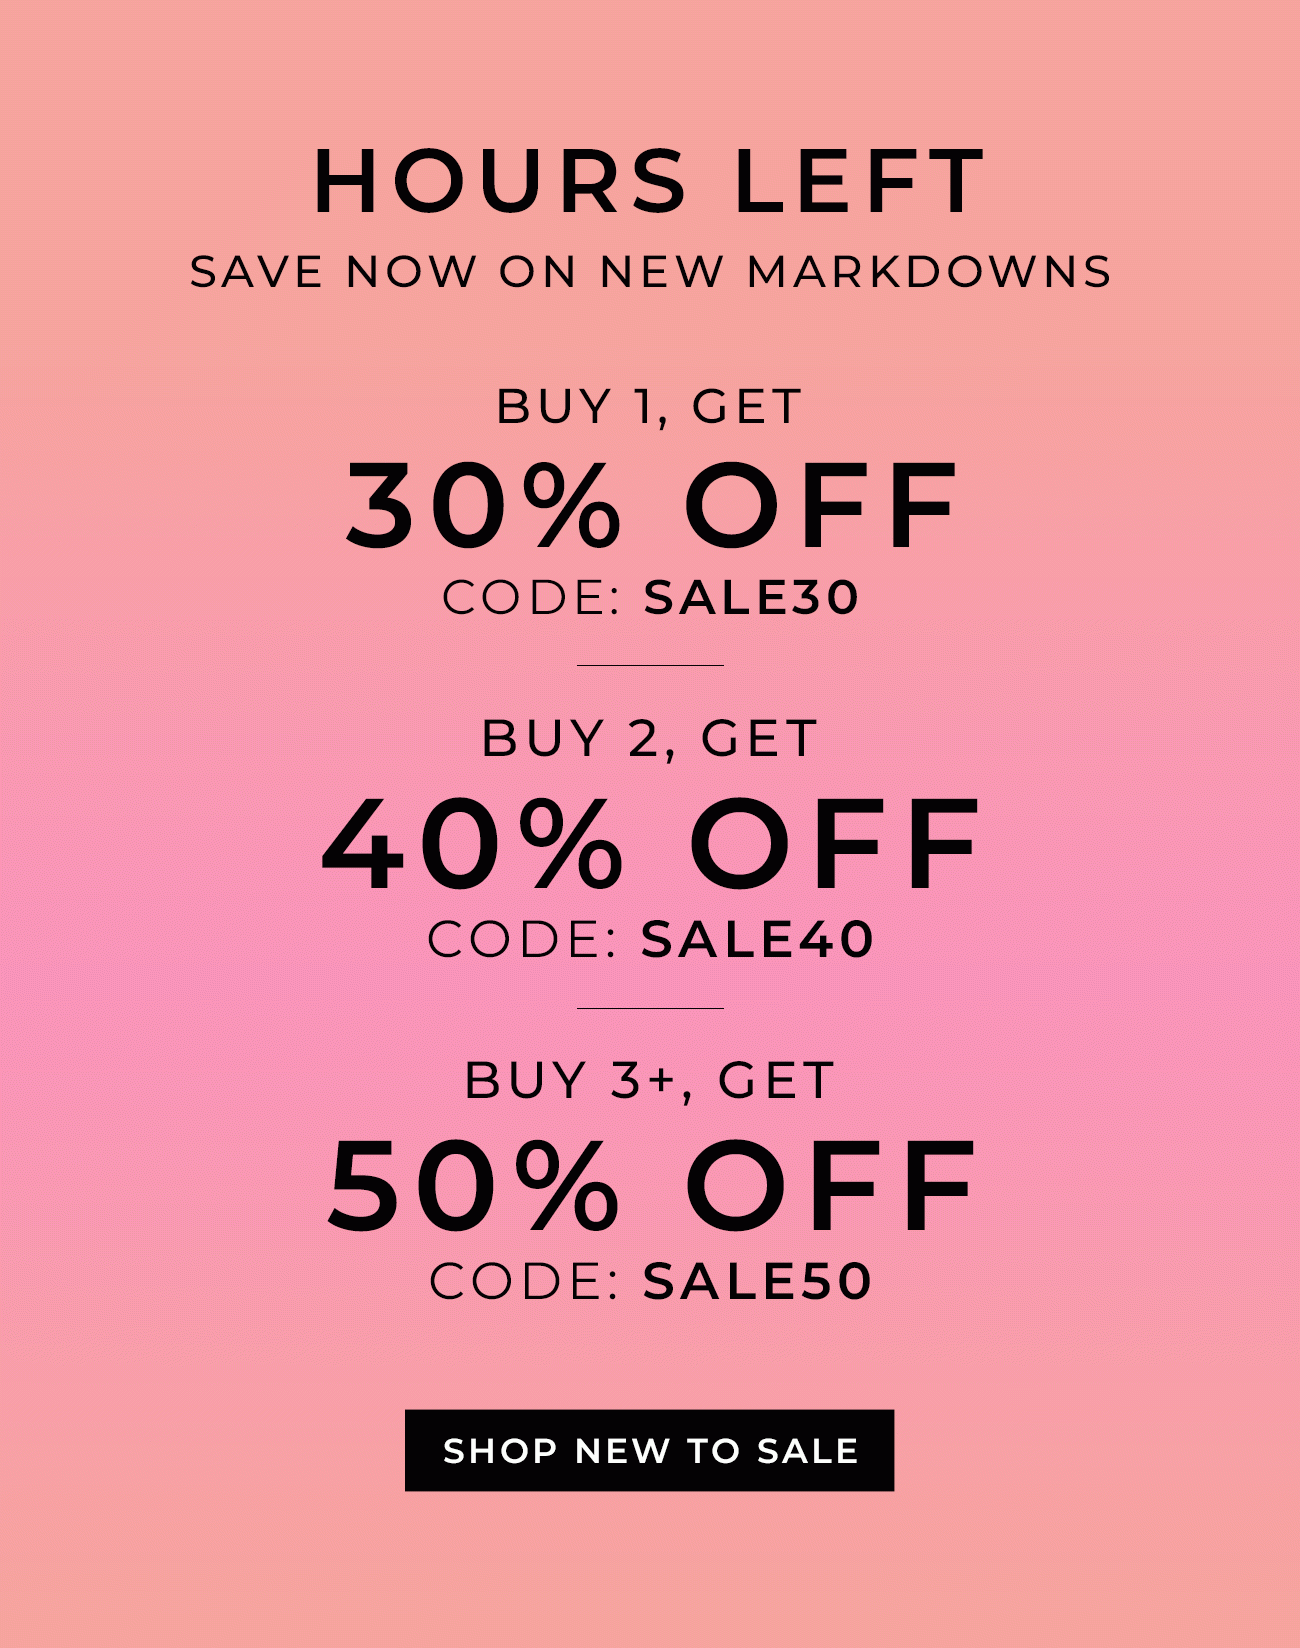 Hours Left - Save Now on New Markdowns | Buy 1 item, Get 30% Off code: SALE30 Buy 2 items, Get 40% Off code: SALE40 Buy 3+ items, Get 50% Off code: SALE50